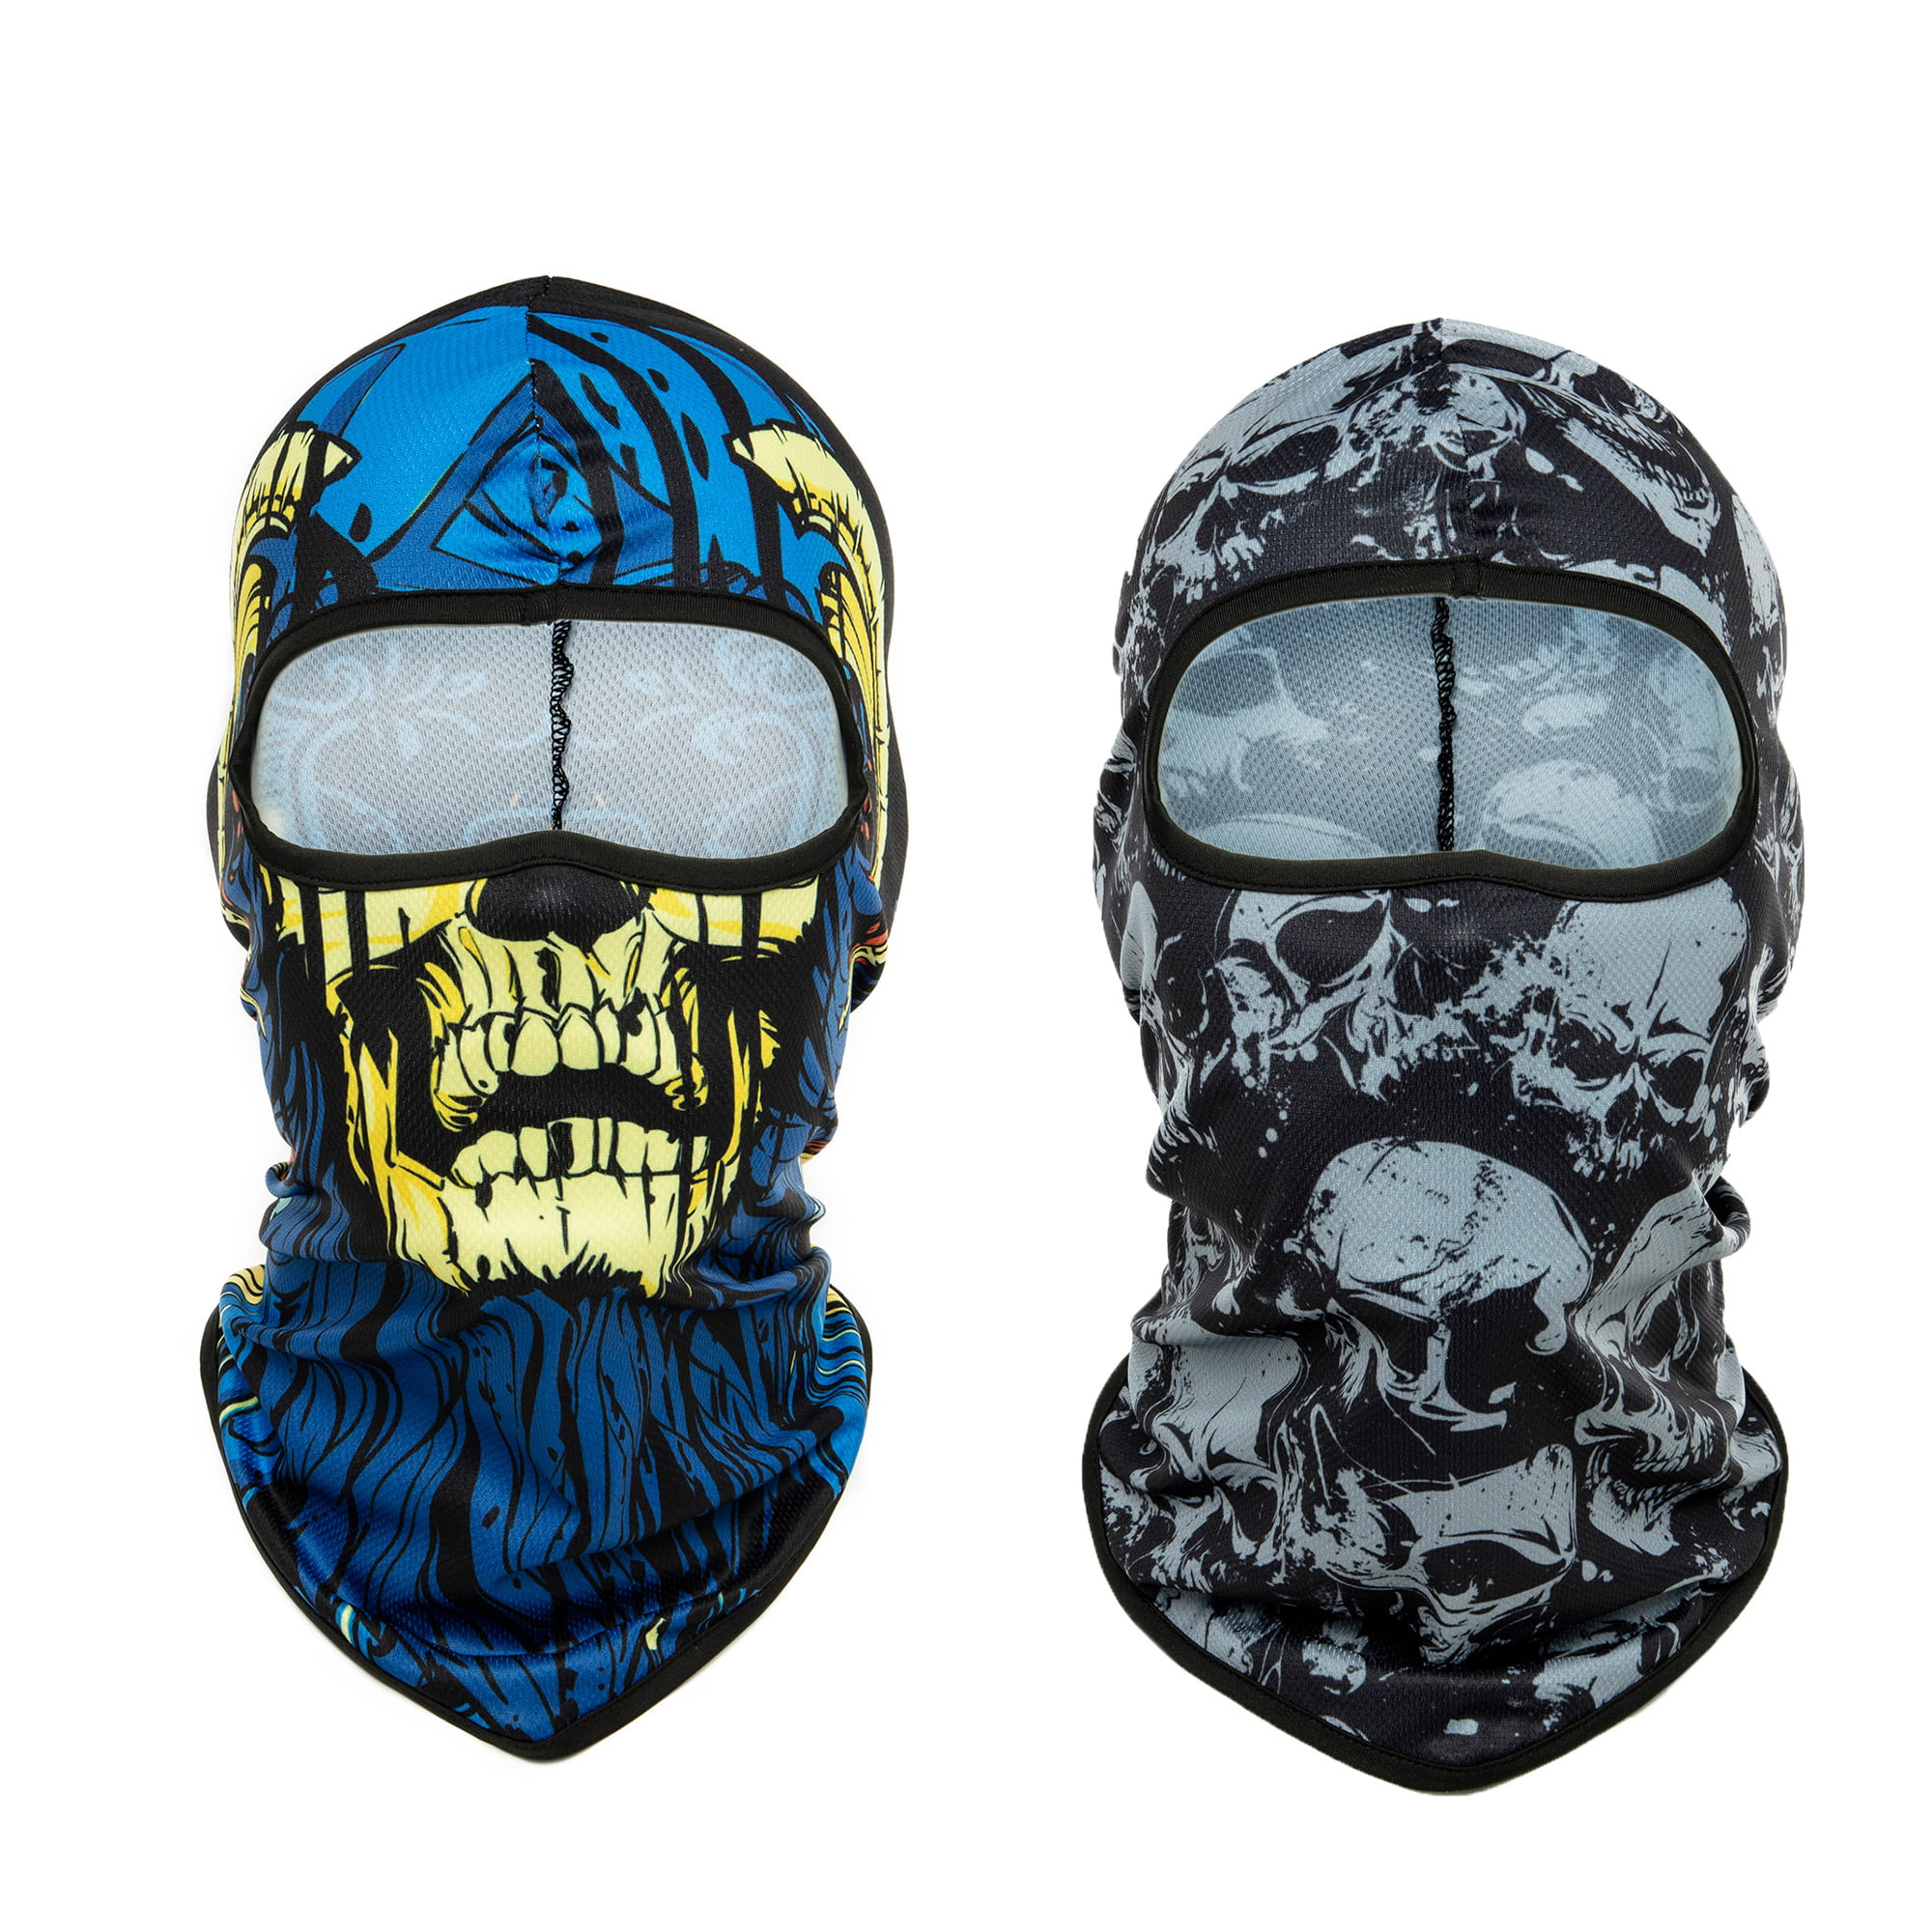 Face Mask Pink Owl Full Face Mask Ski Masks for Skiing,Snowboarding and Motorcycling 9 x 15 Inch 